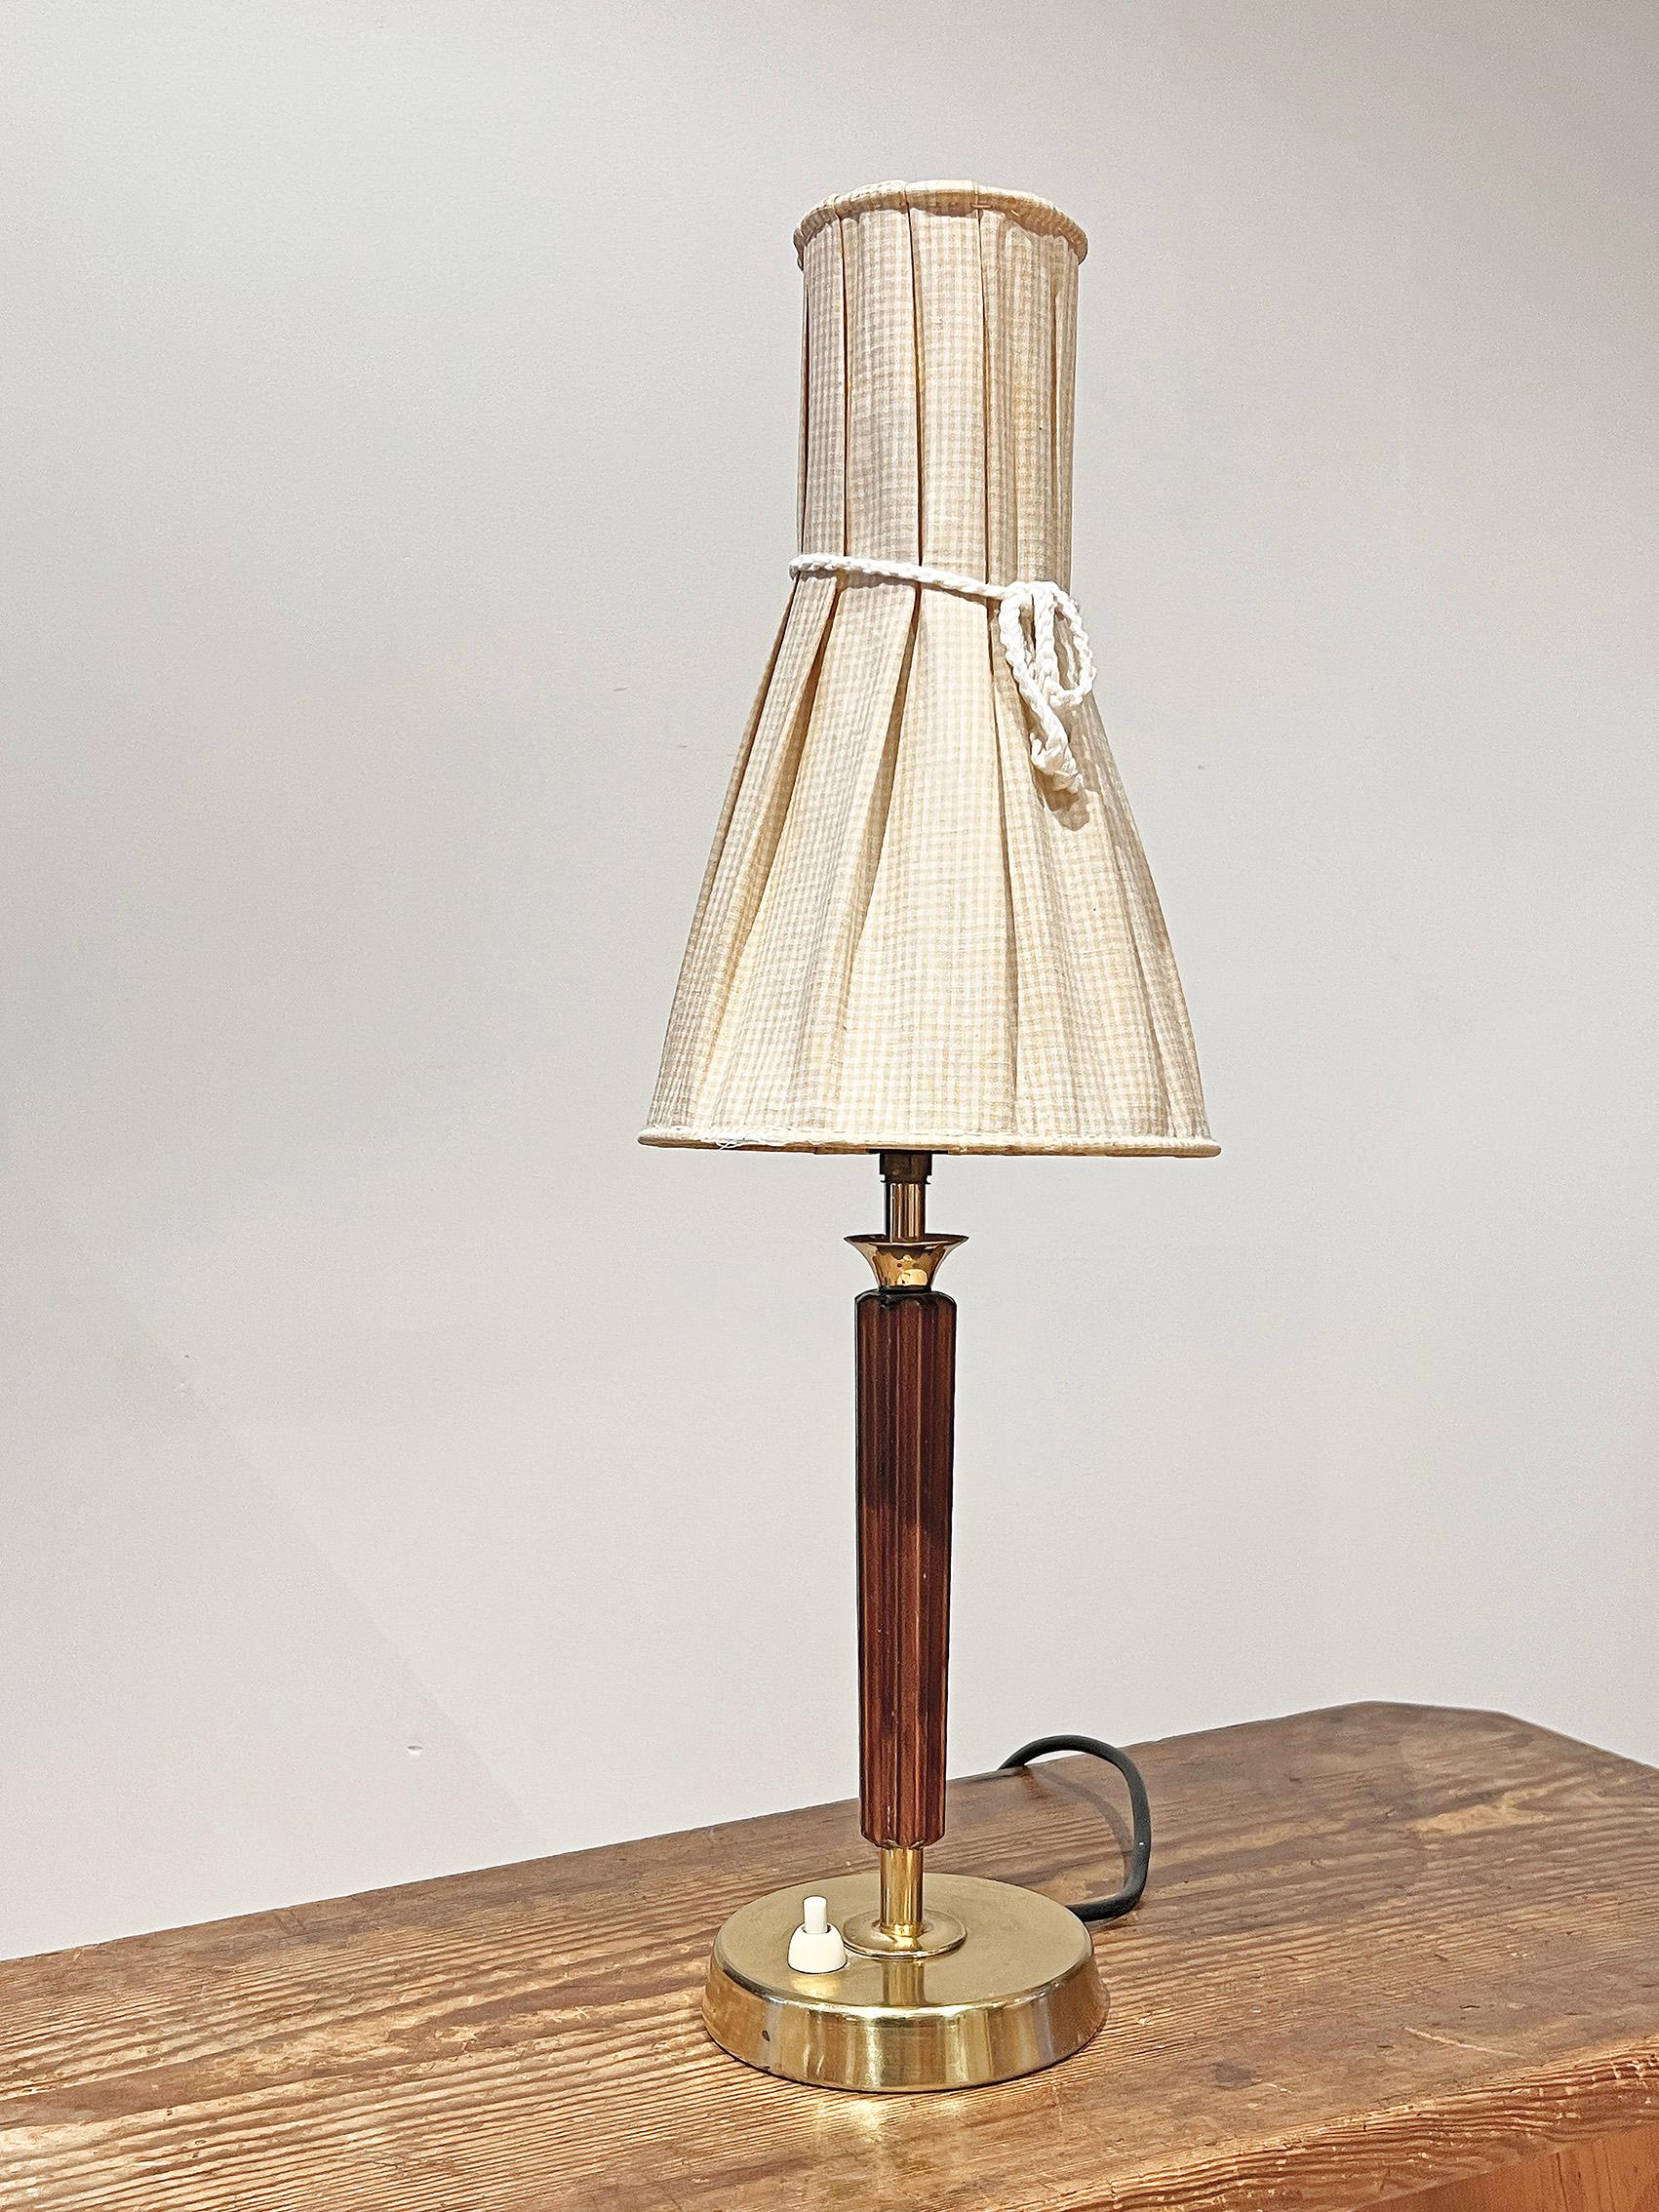 Scandinavian modern table lamp ca 1950-60's.
Unknown designer and maker.
Good vintage condition, wear and patina consistent with age and use. 
Scratches on the base, wear on the lamp foot.